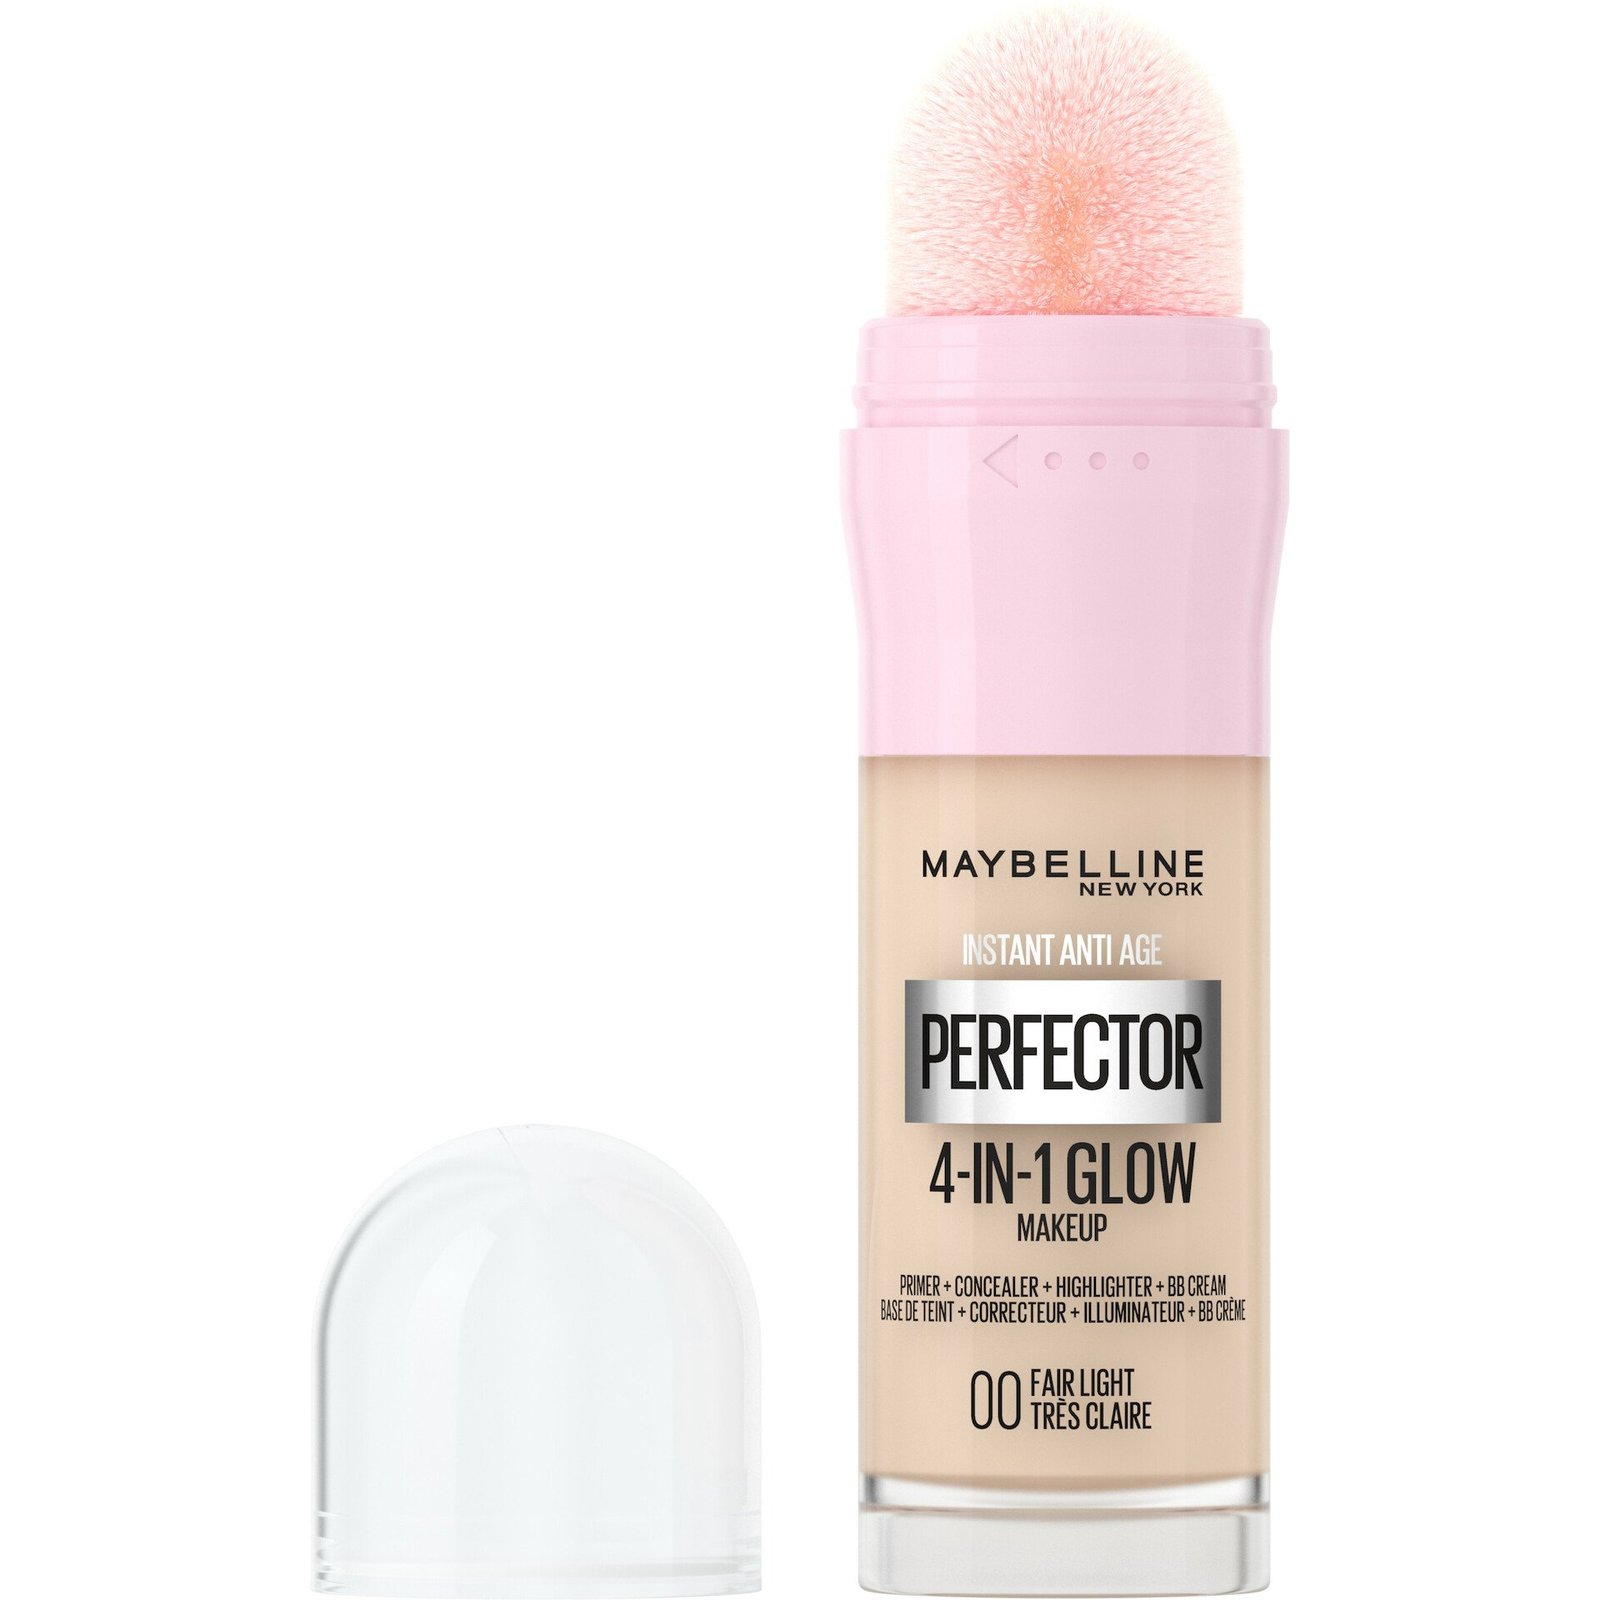 Maybelline New York Instant Perfector 4-in-1 Glow Makeup Foundation 00 Fair/Light